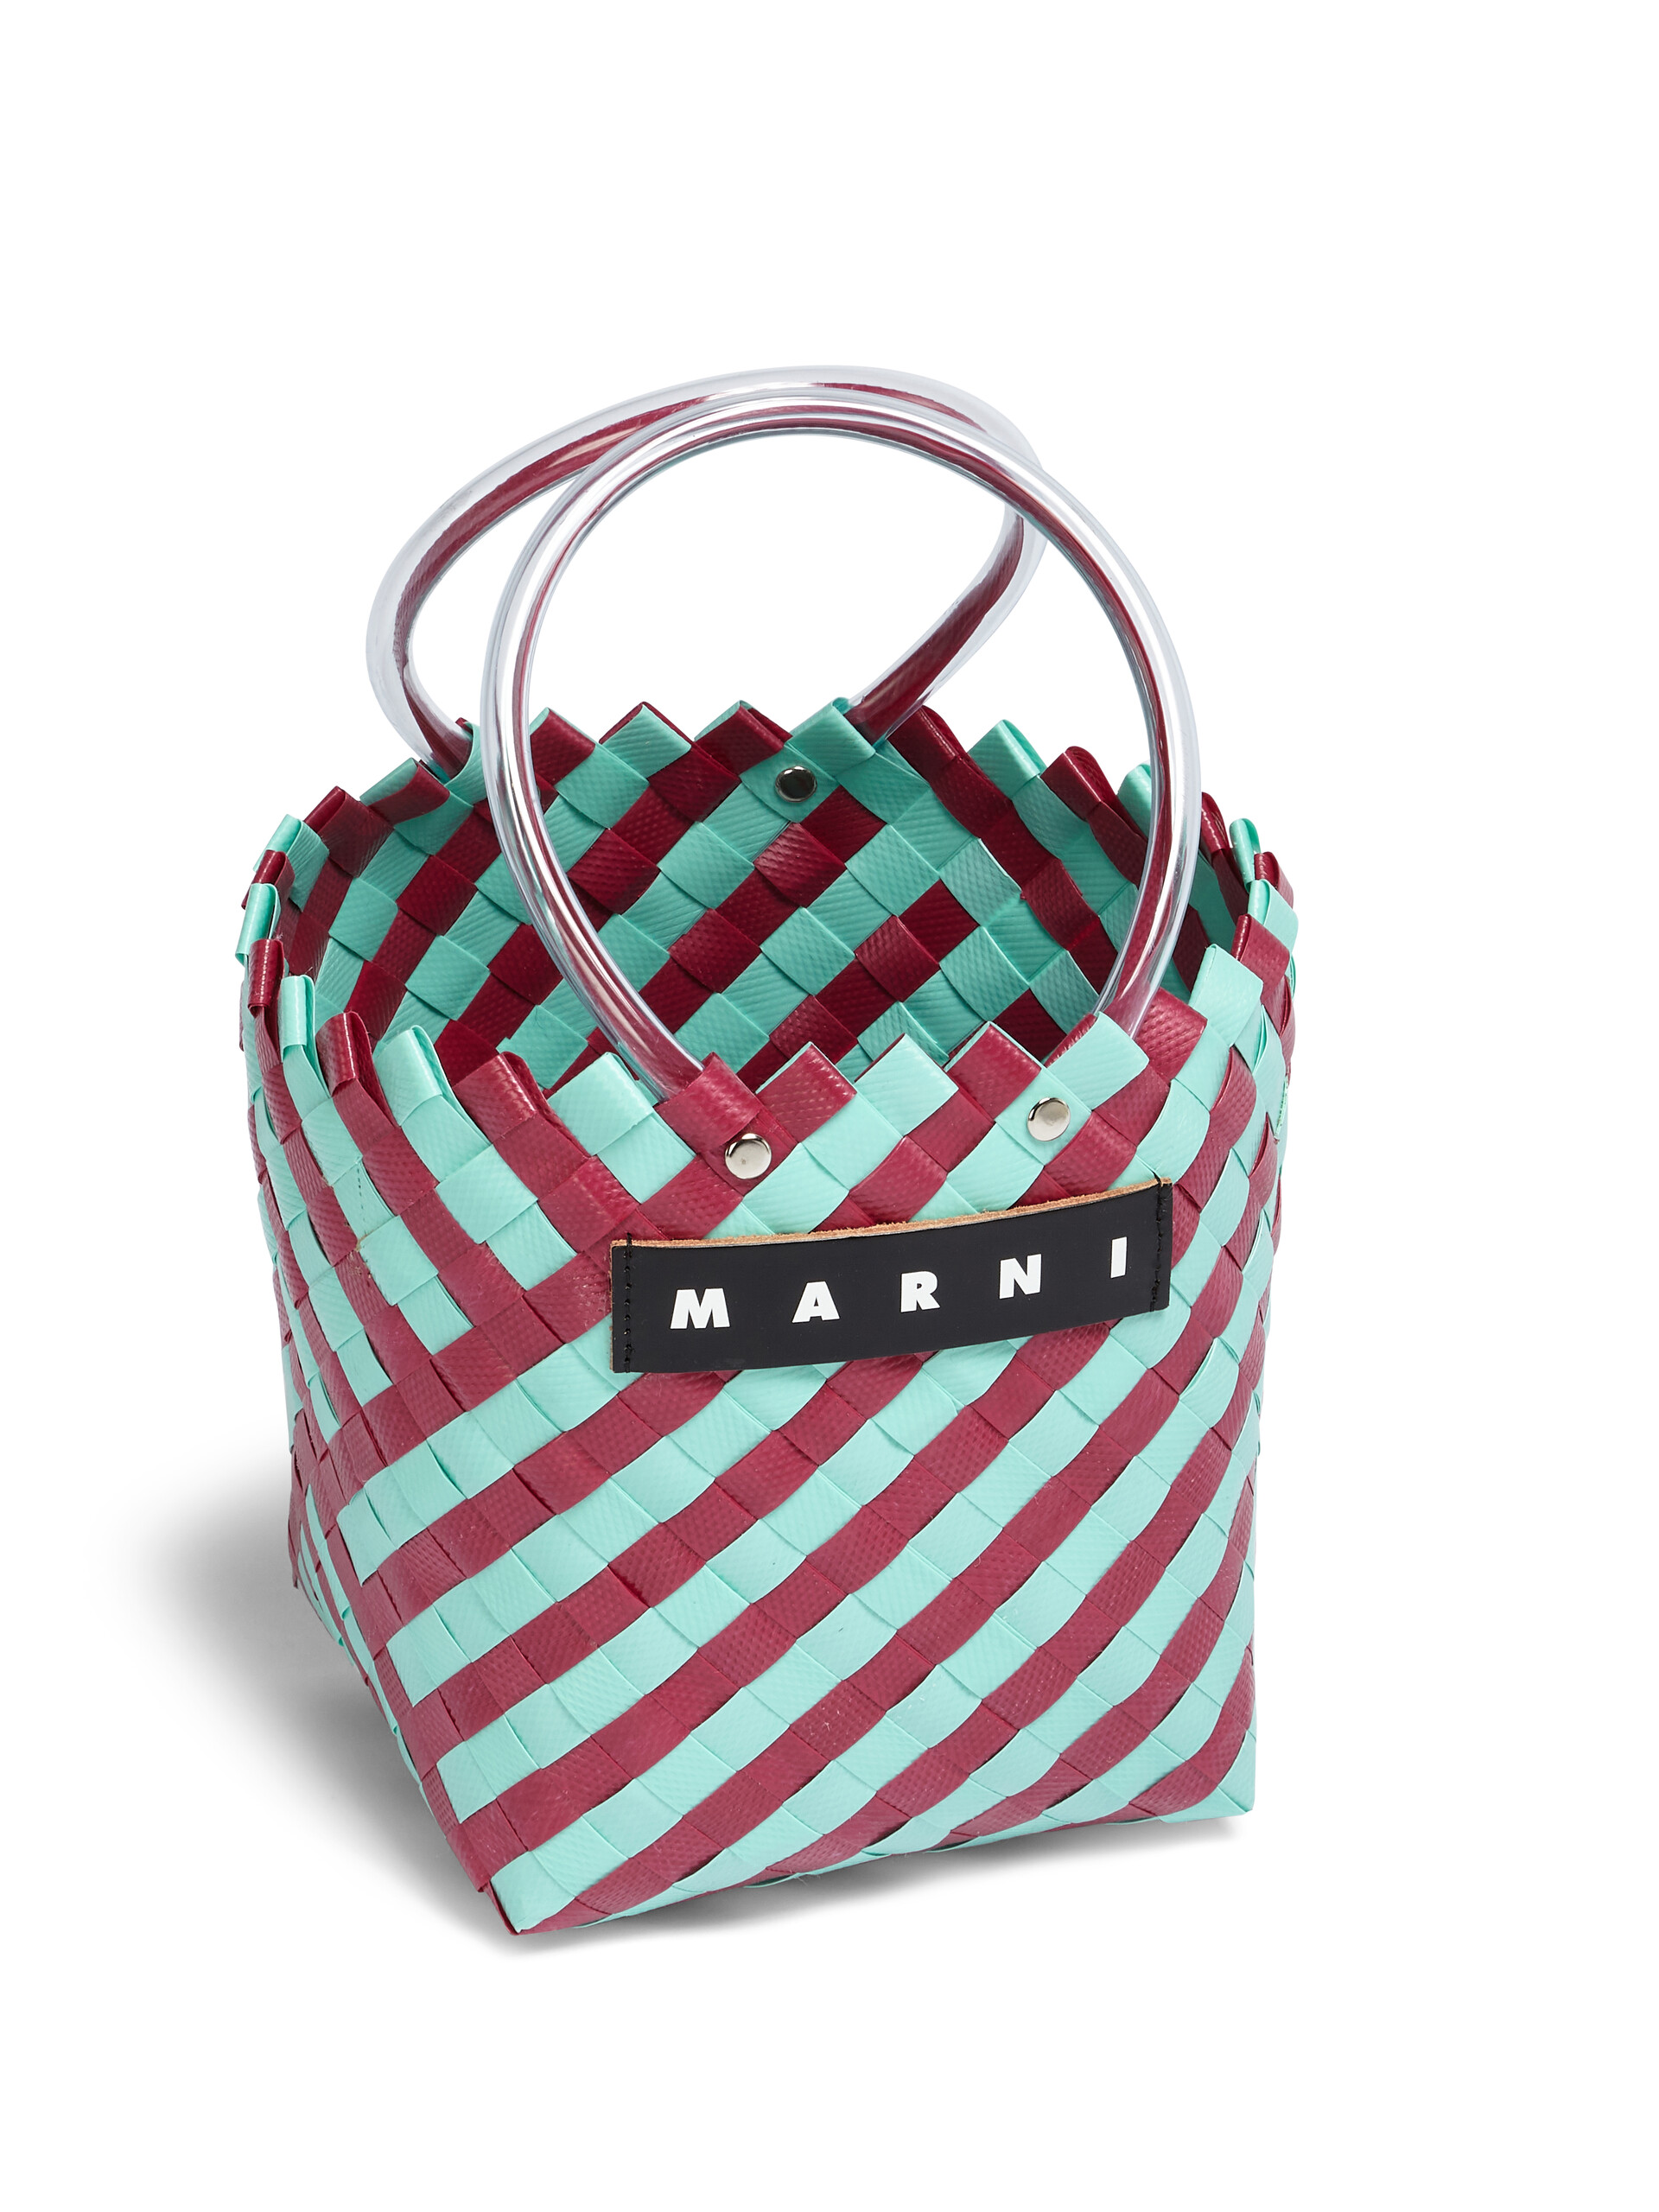 MARNI MARKET bag in green and burgundy woven material - Bags - Image 4